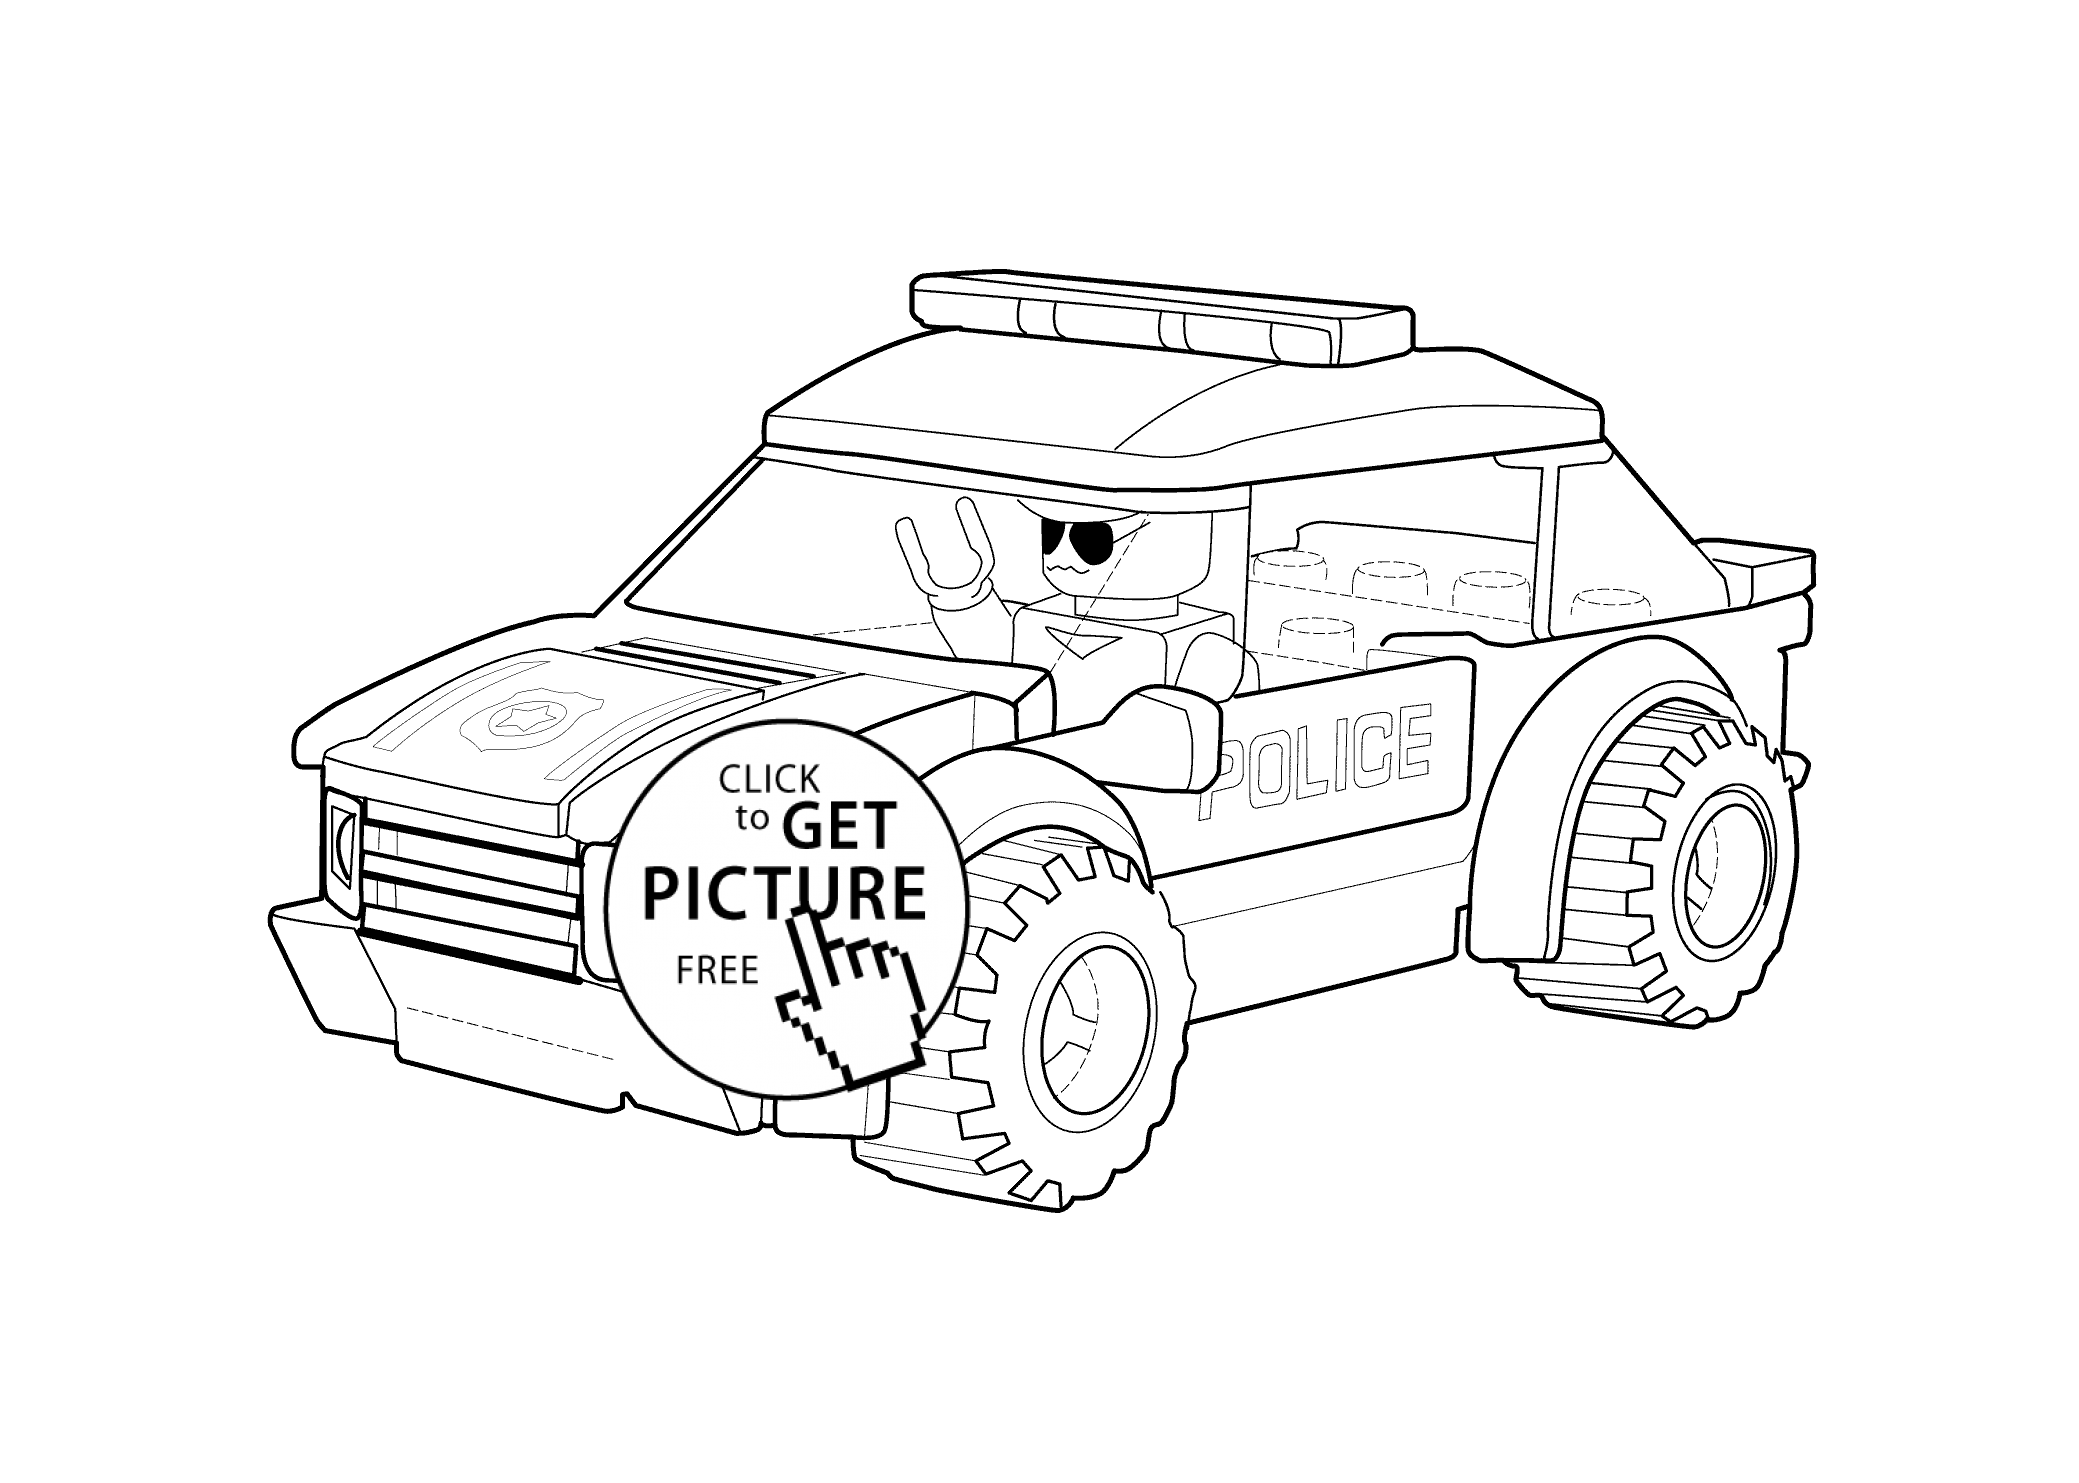 lego police coloring pages to print police car coloring page lego printable free lego pages coloring to lego police print 